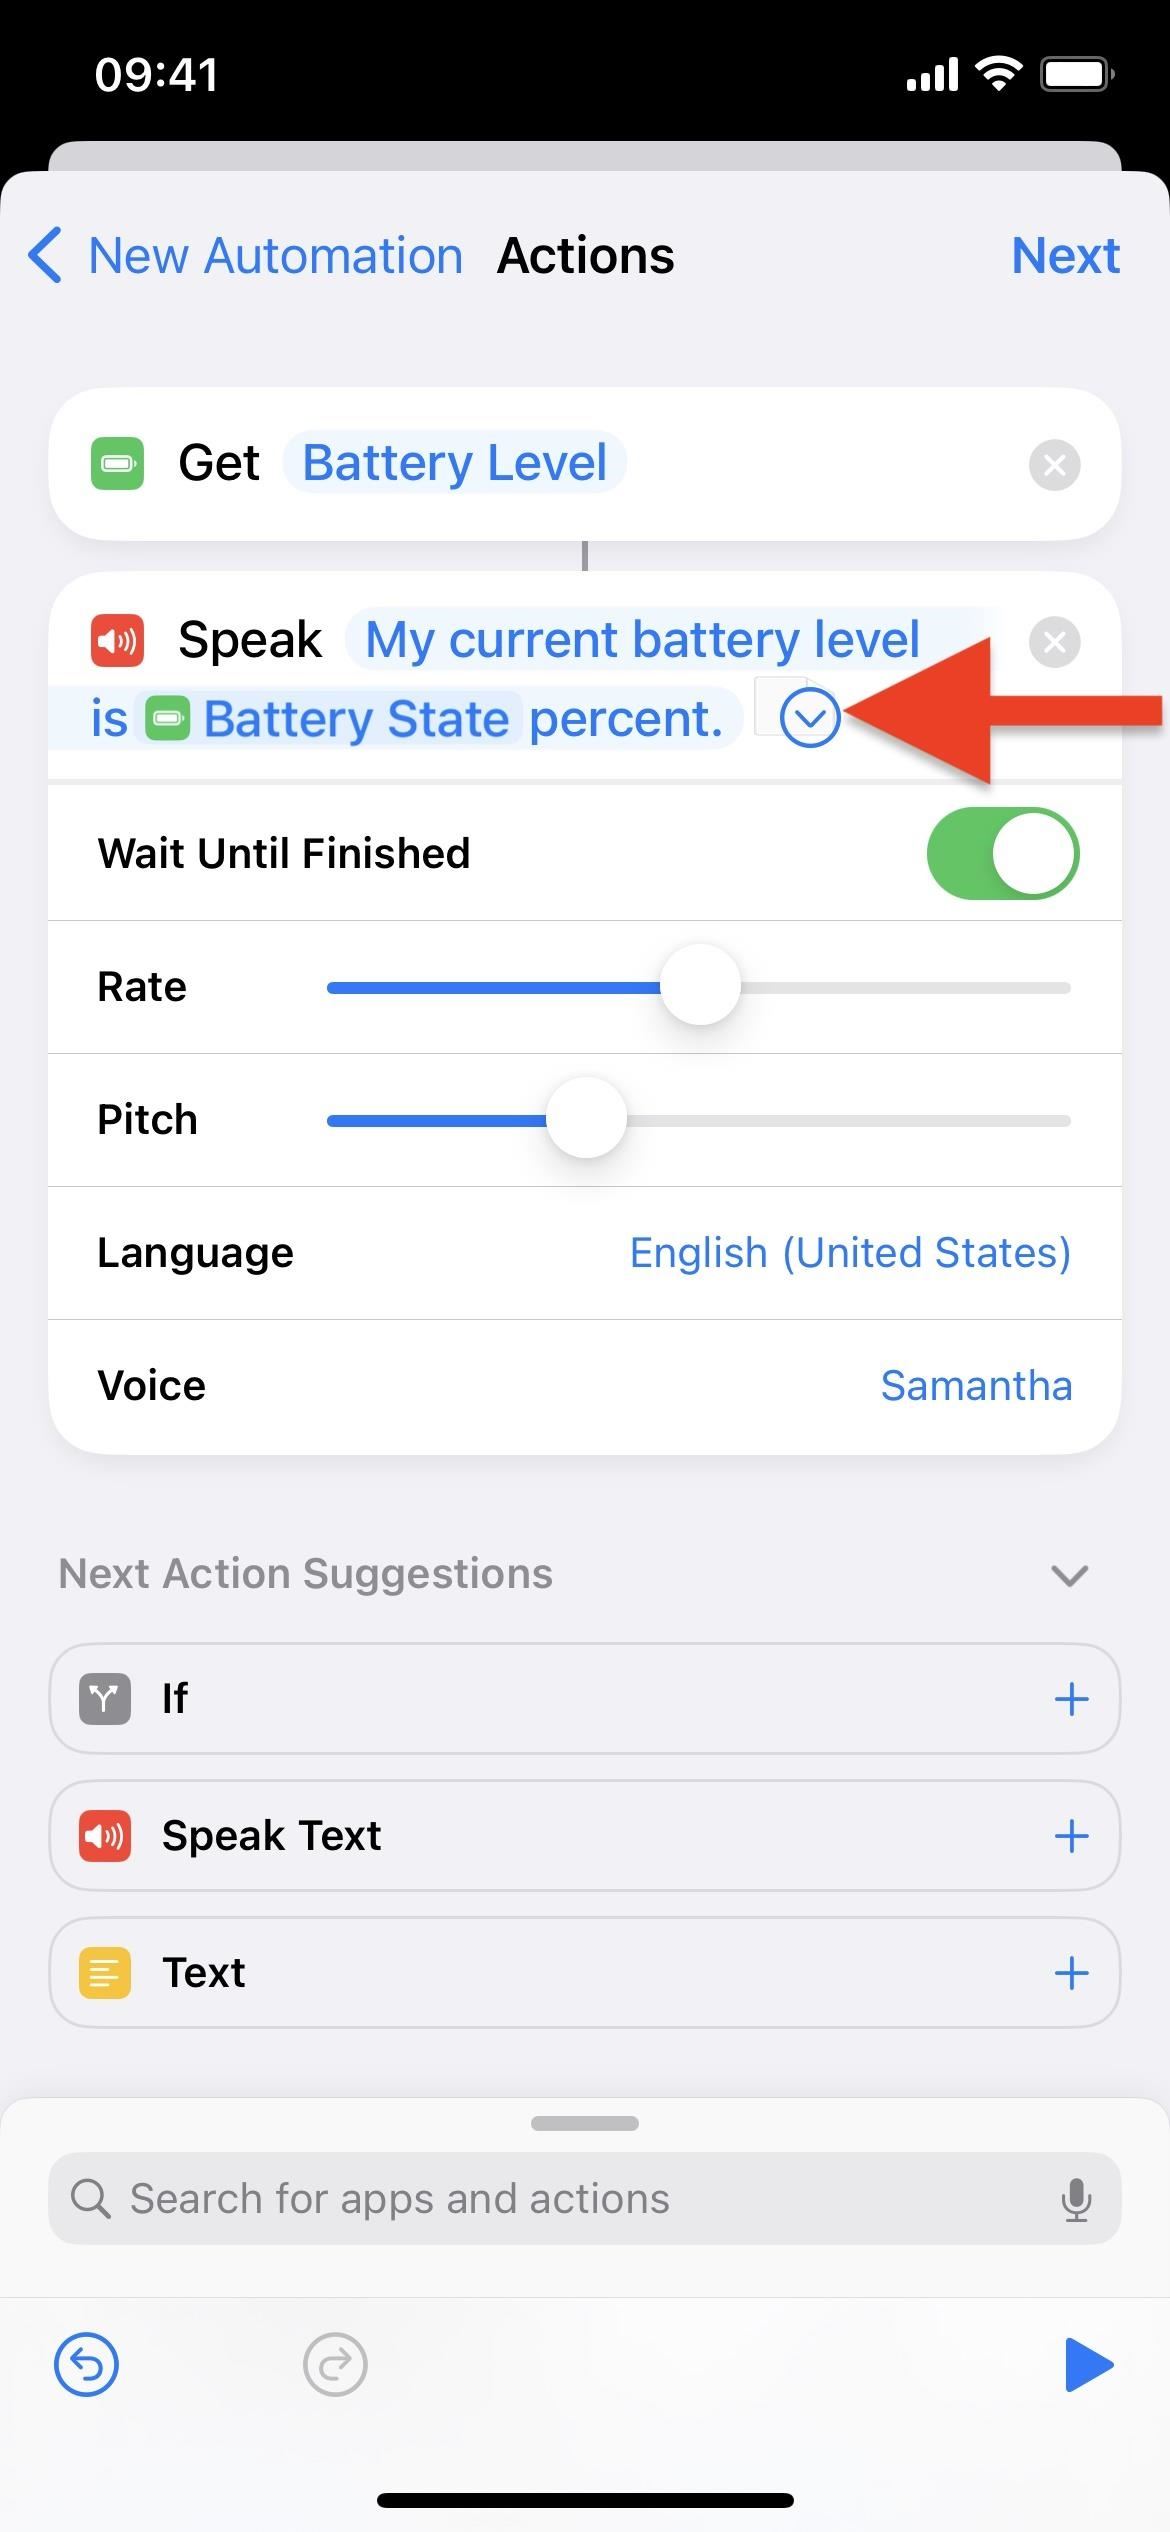 Make Your iPhone Speak Its Battery Level Every Time You Start or Stop Charging